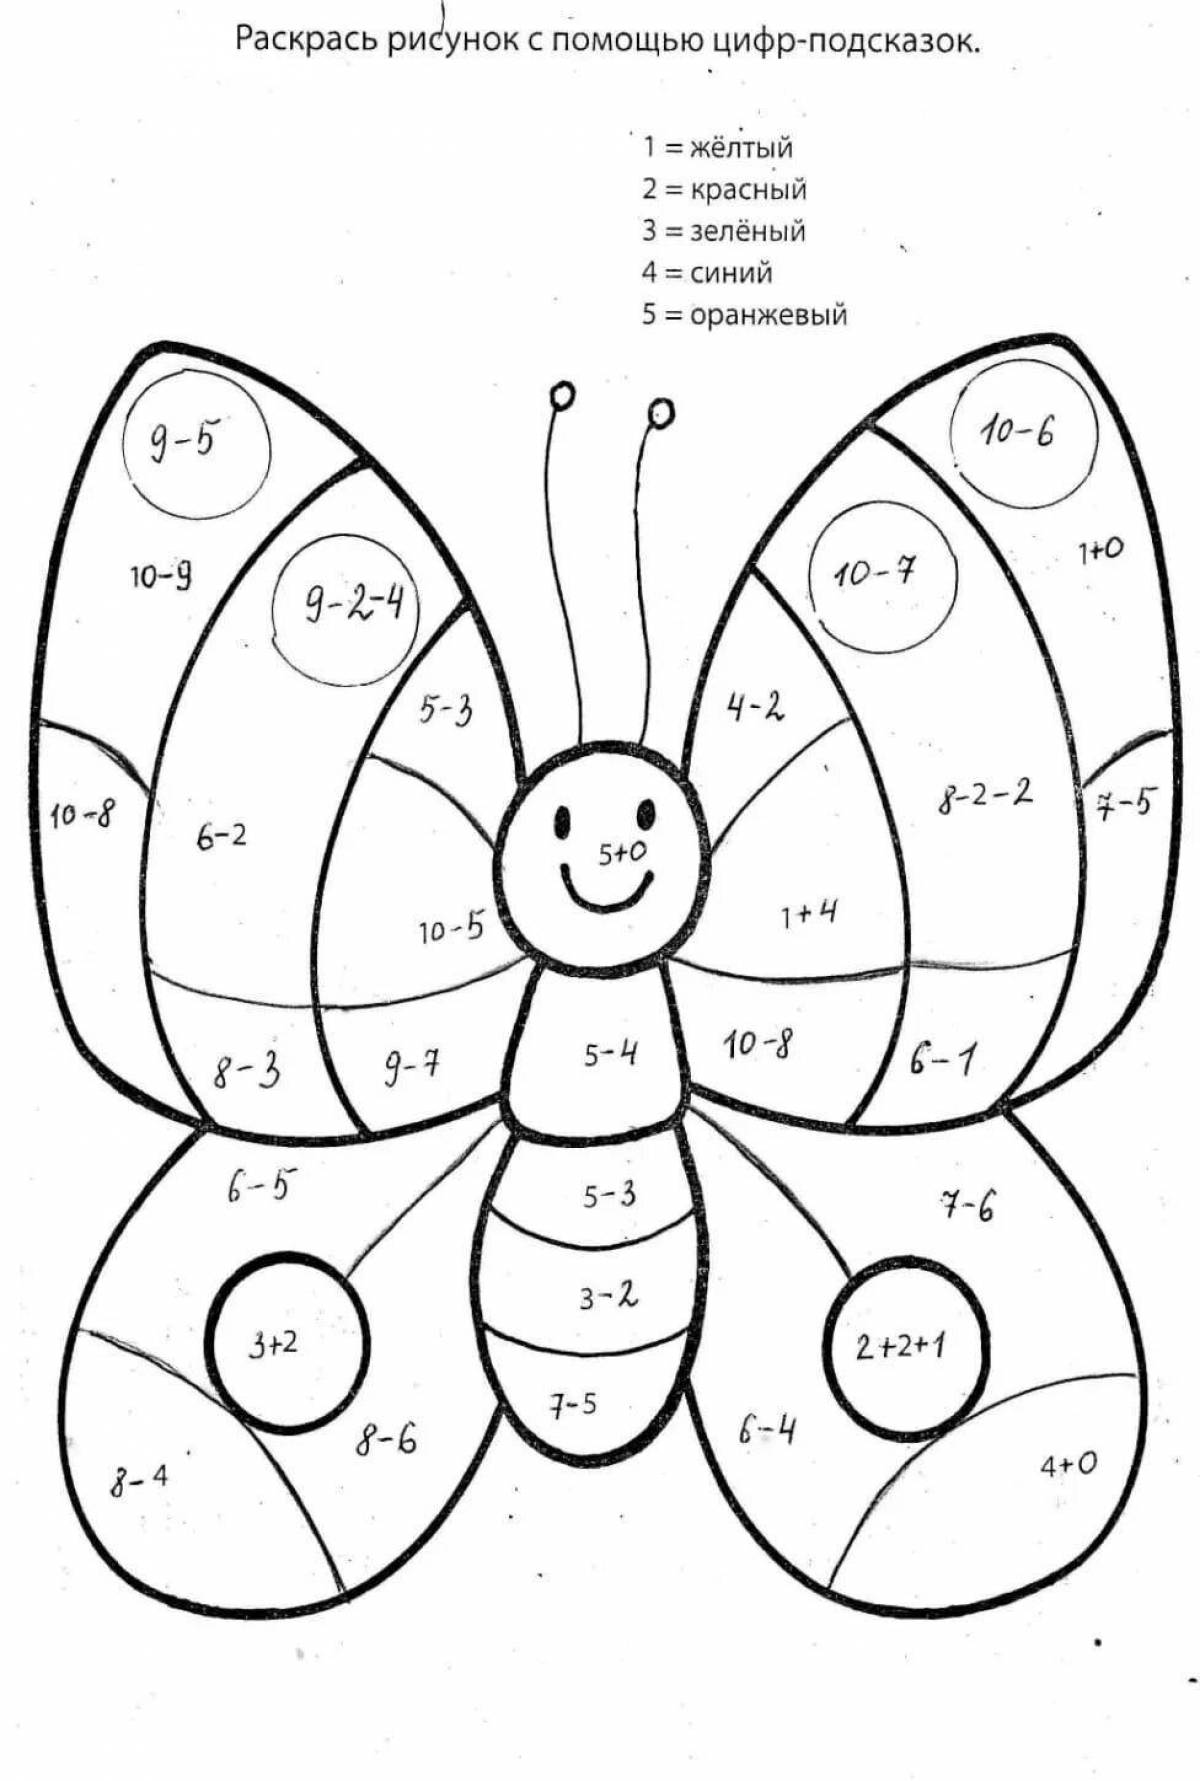 Fun coloring book with math examples